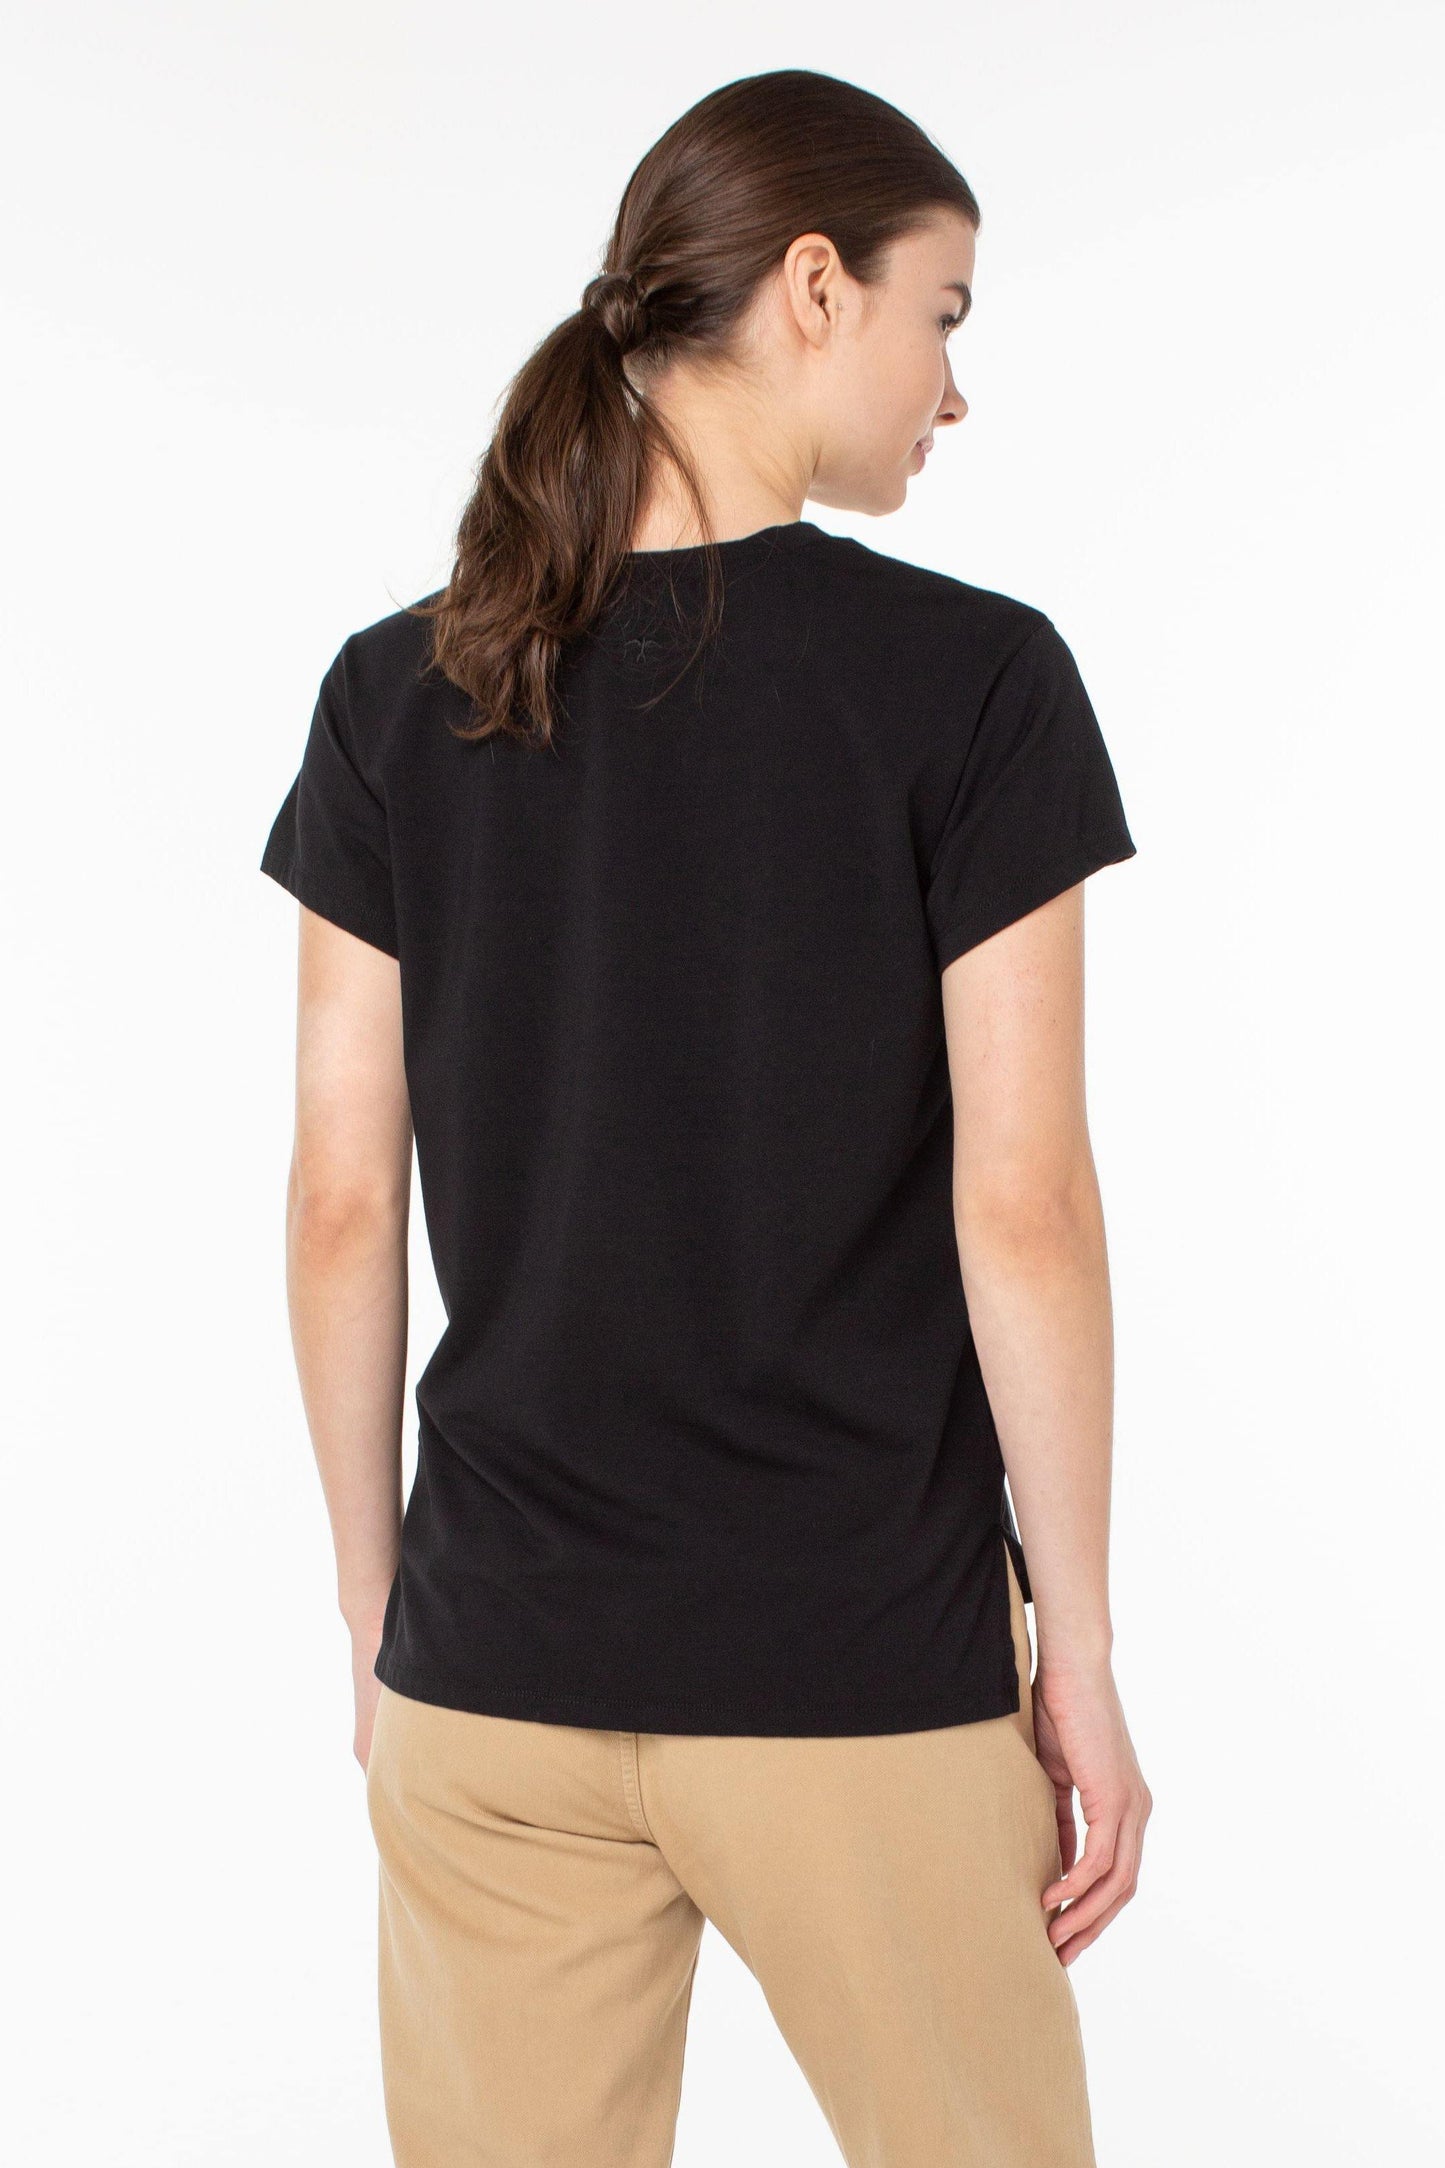 The Relax Top Tee in Black by Serra - Haven